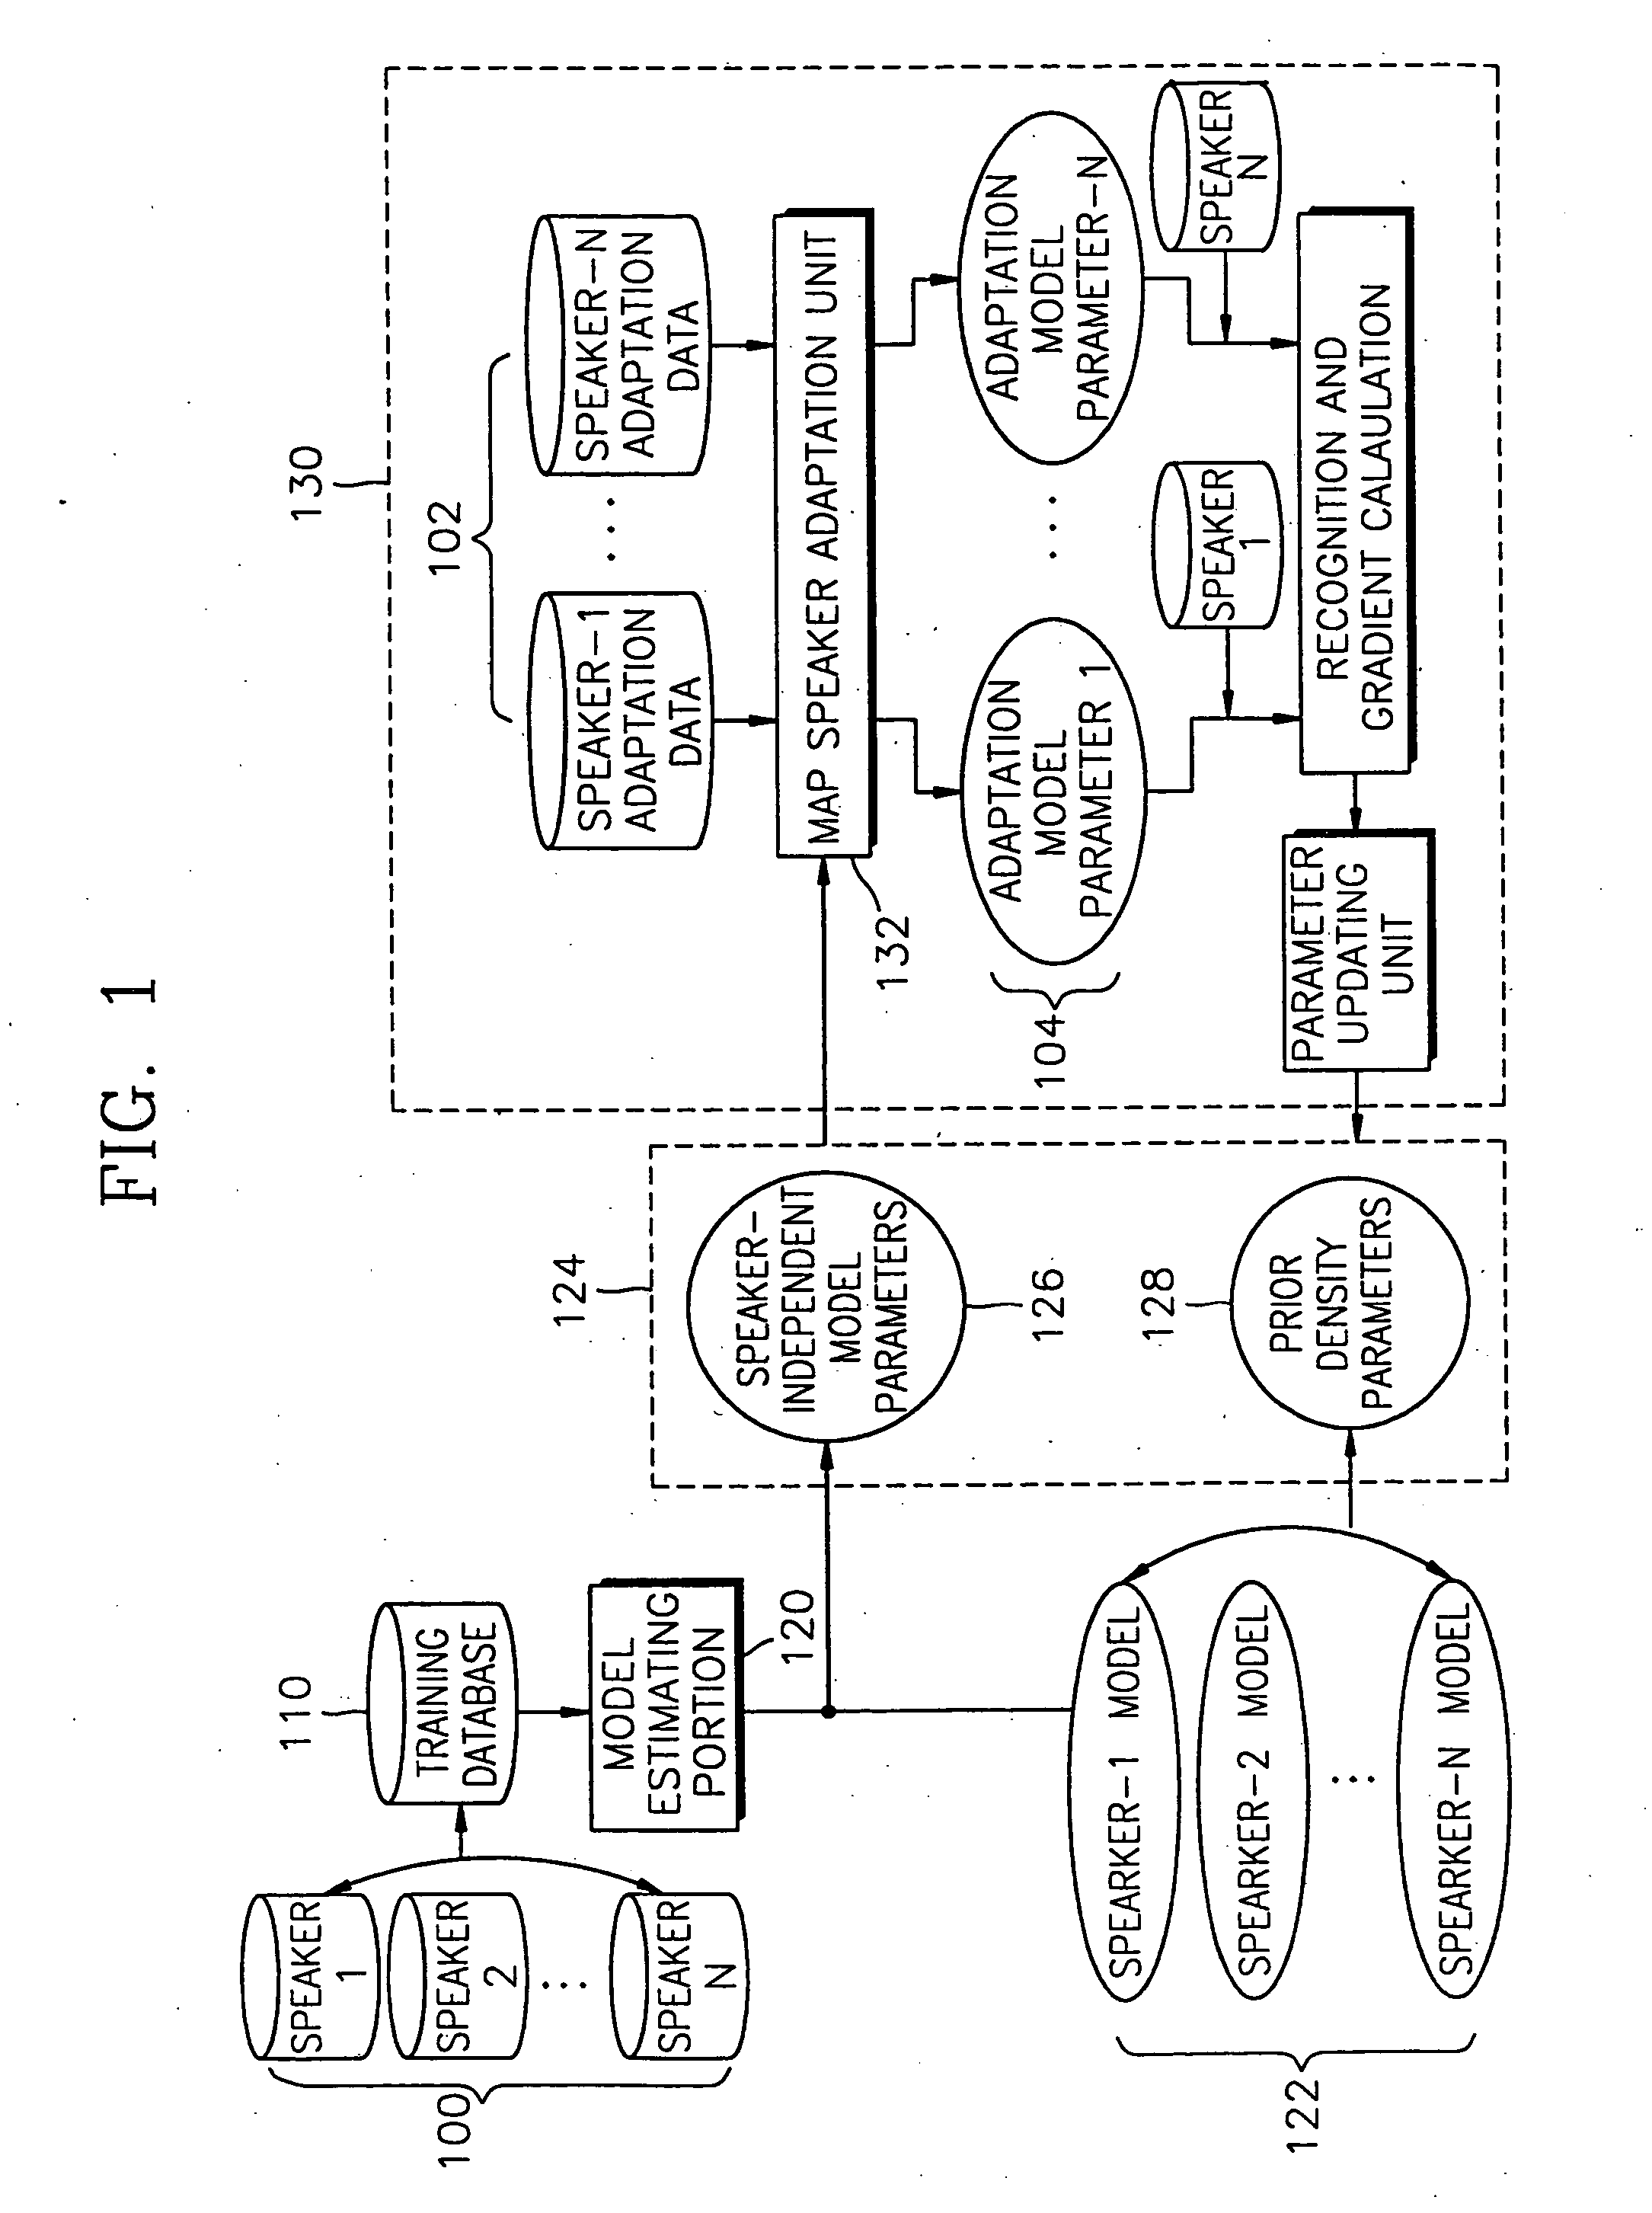 Method and apparatus for discriminative estimation of parameters in maximum a posteriori (MAP) speaker adaptation condition and voice recognition method and apparatus including these